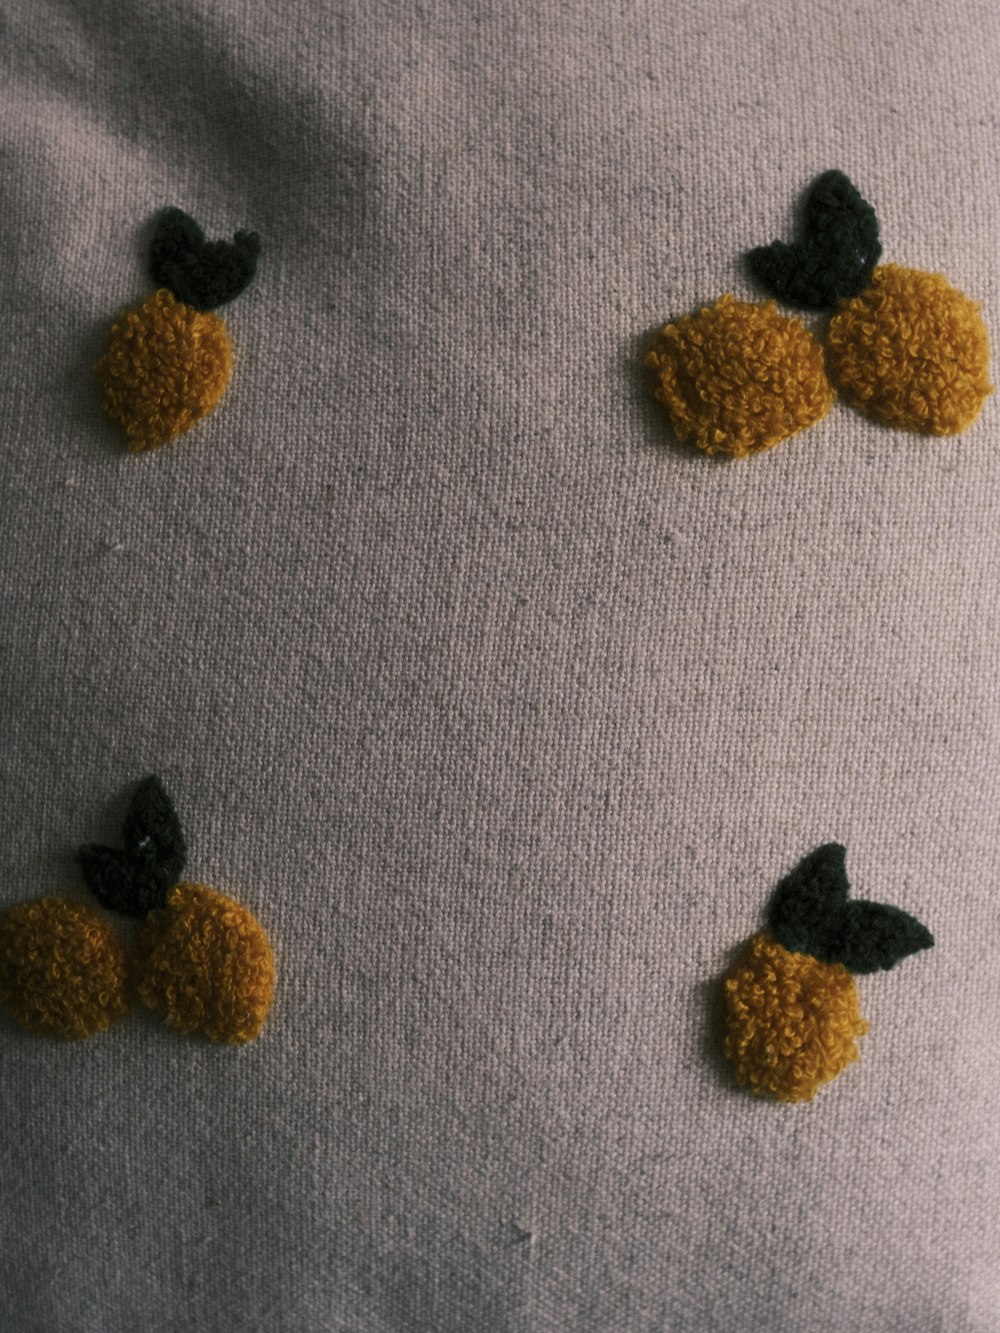 a close up of a sweater with crocheted fruit on it